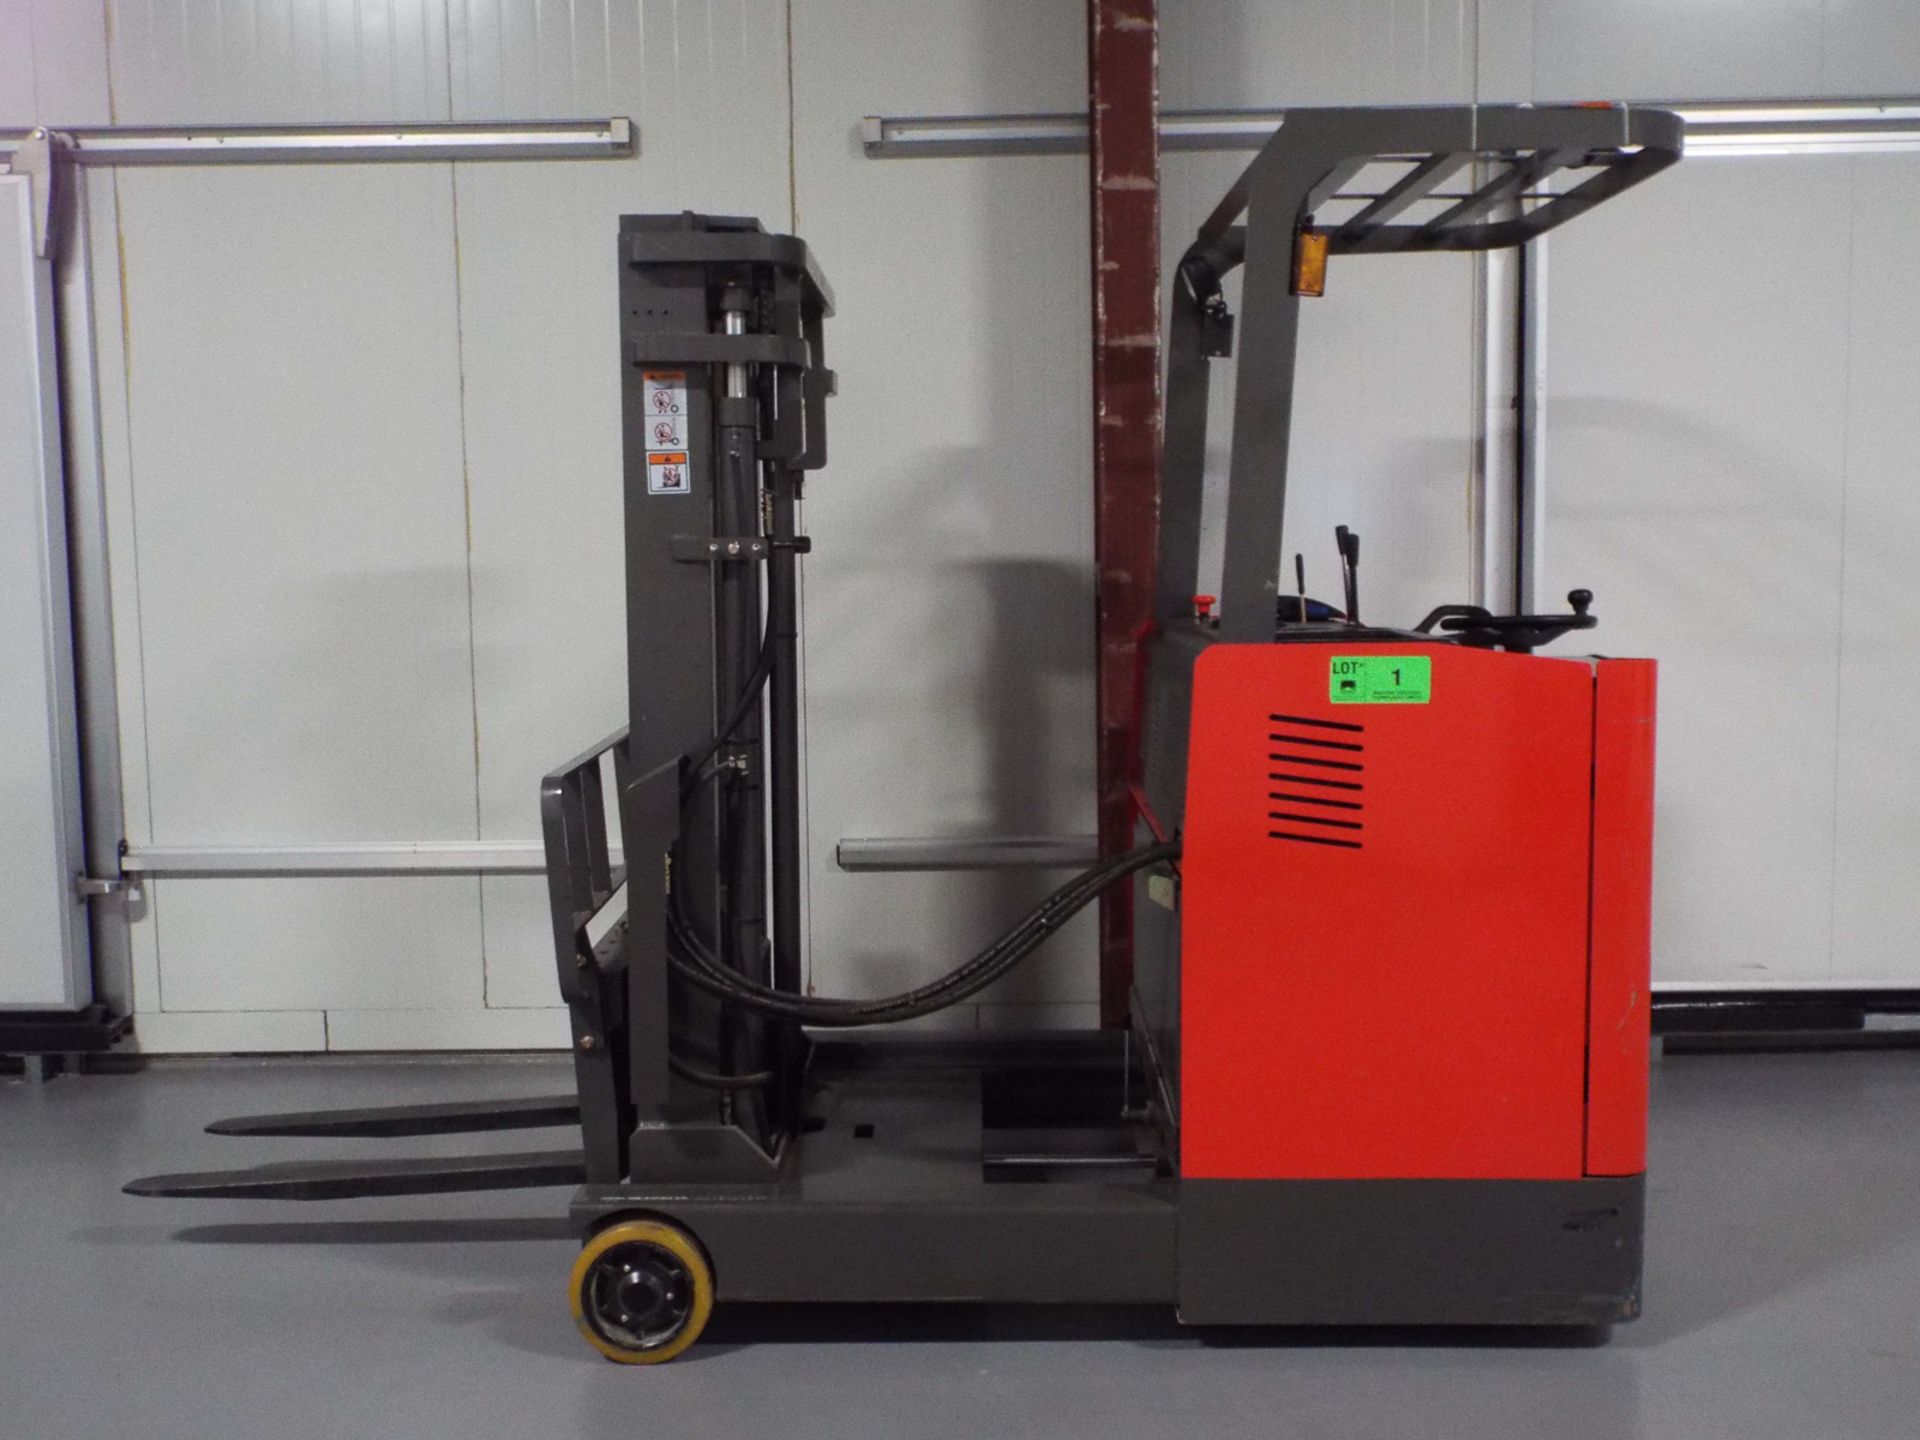 MIMA TF25-30 ELECTRIC REACH TRUCK WITH 5500 LB. CAPACITY, 118" MAX. LIFT HEIGHT, 33" MAX. FORWARDING - Image 4 of 7